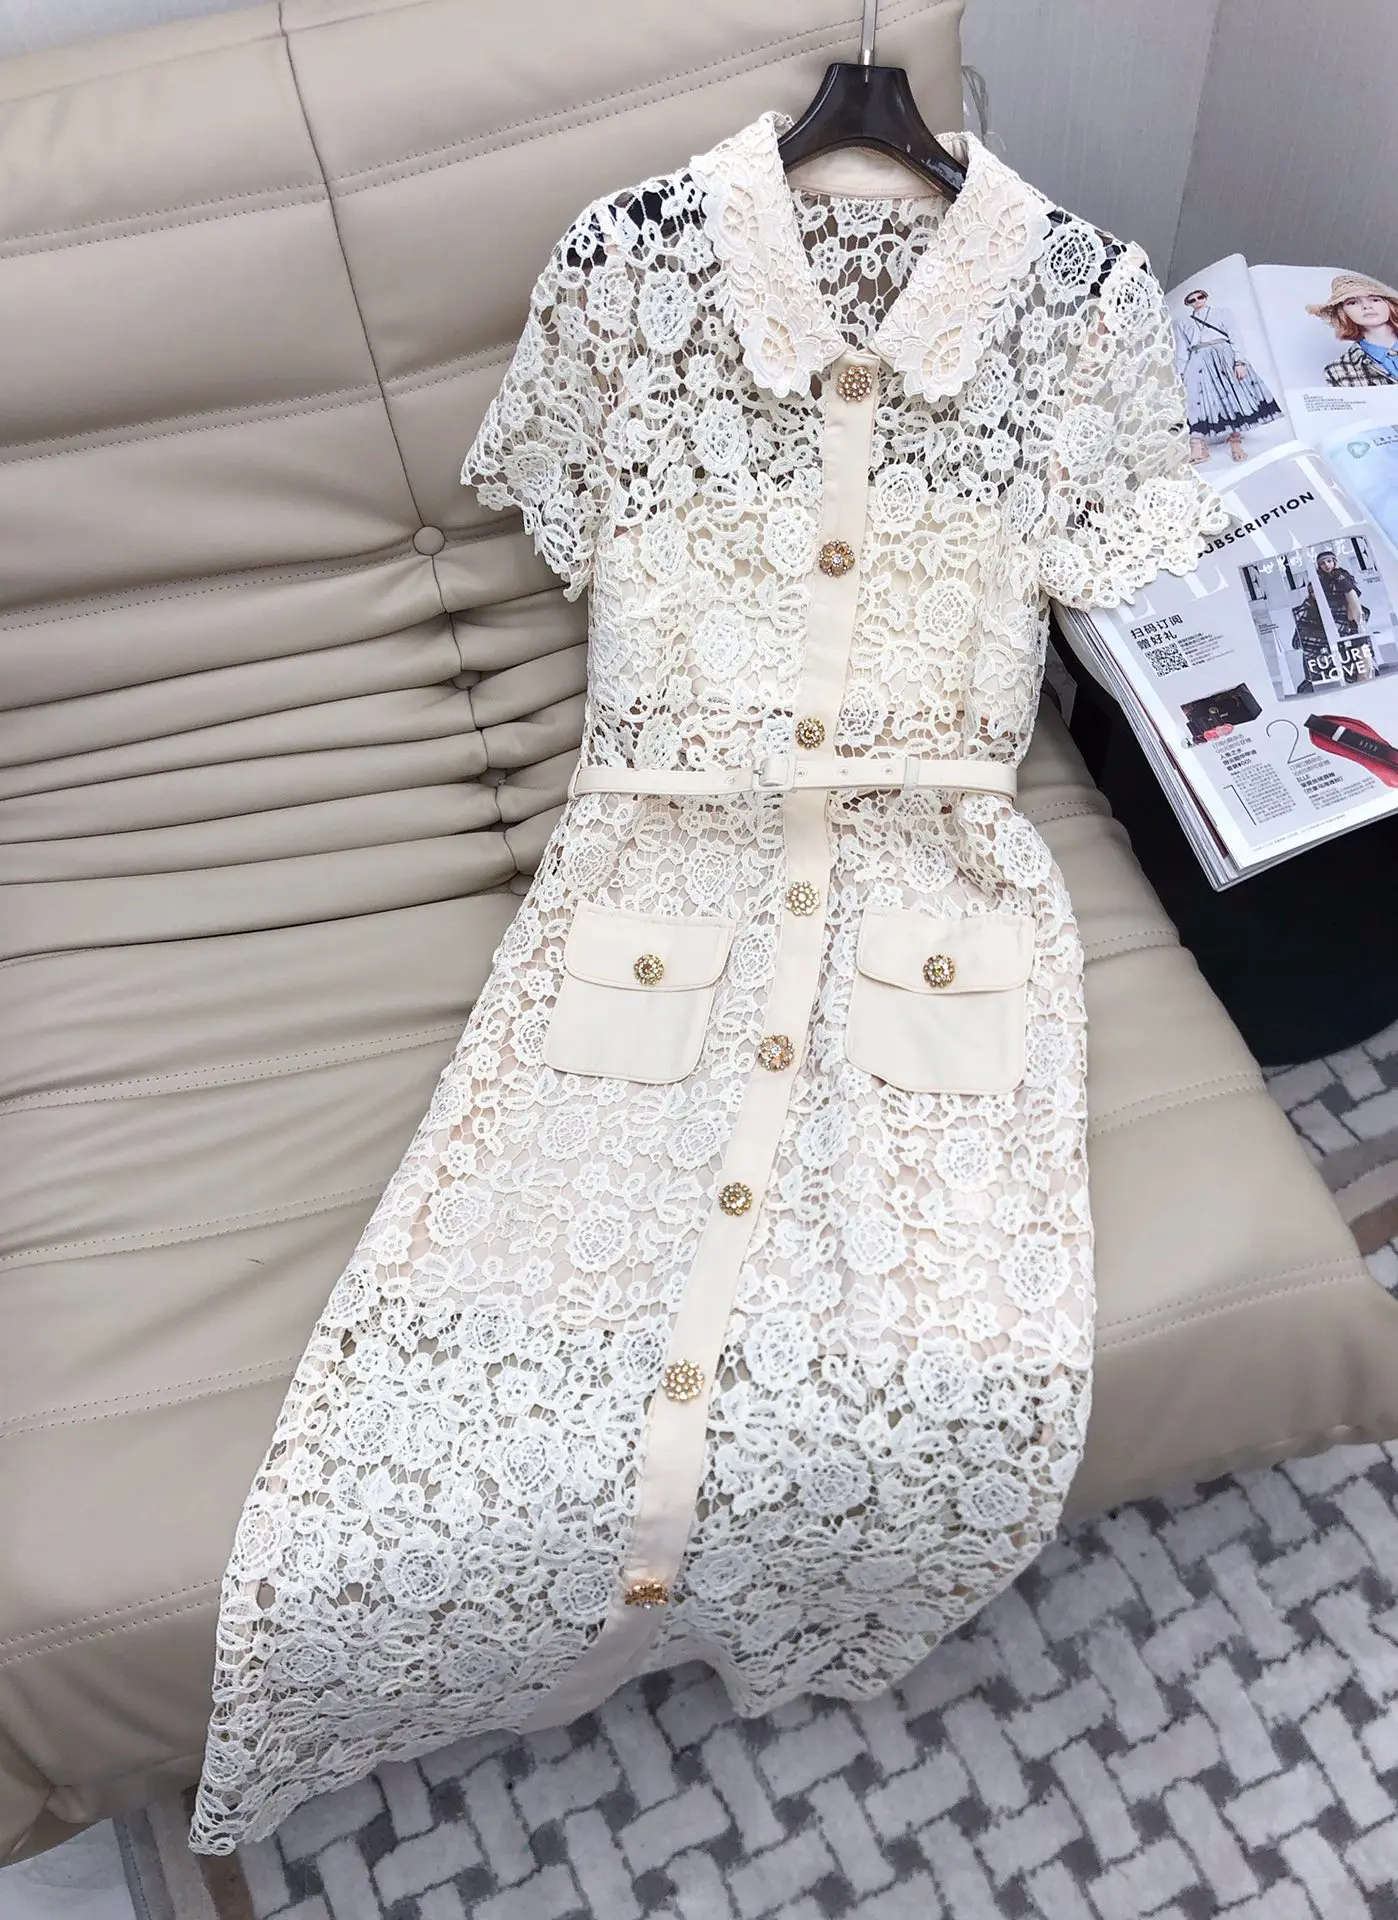 Celebrity women elegant floral lace embroidery hollow out slim long dresses single breasted buttons belt short sleeve dress